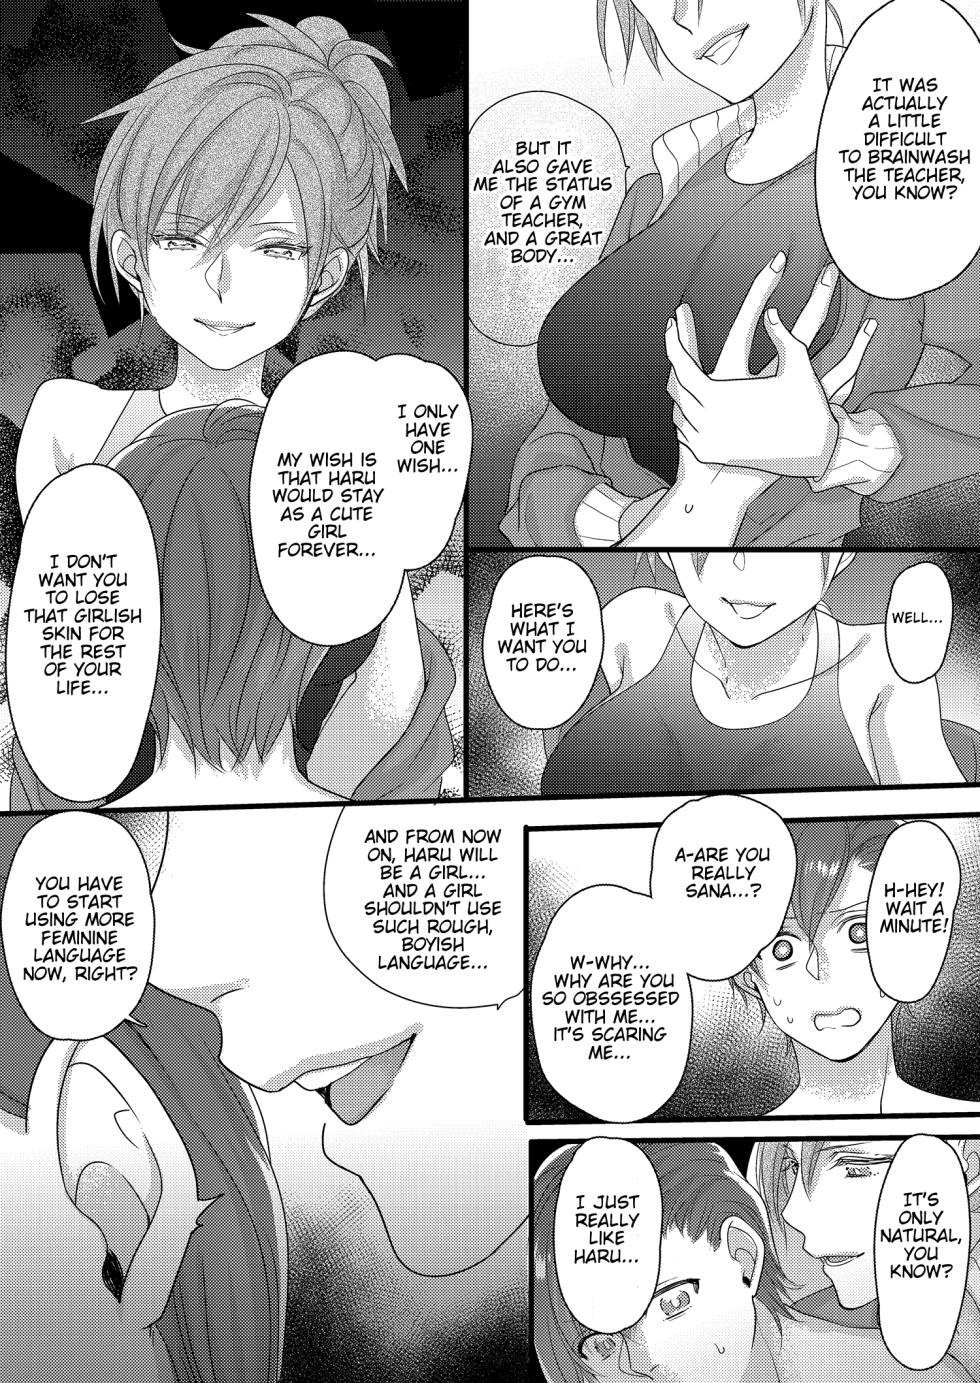 [Marialite (Lyna)] Haru to Sana 2 ～Love Connected Through Cosplay～[English] [Mikodayo] - Page 23